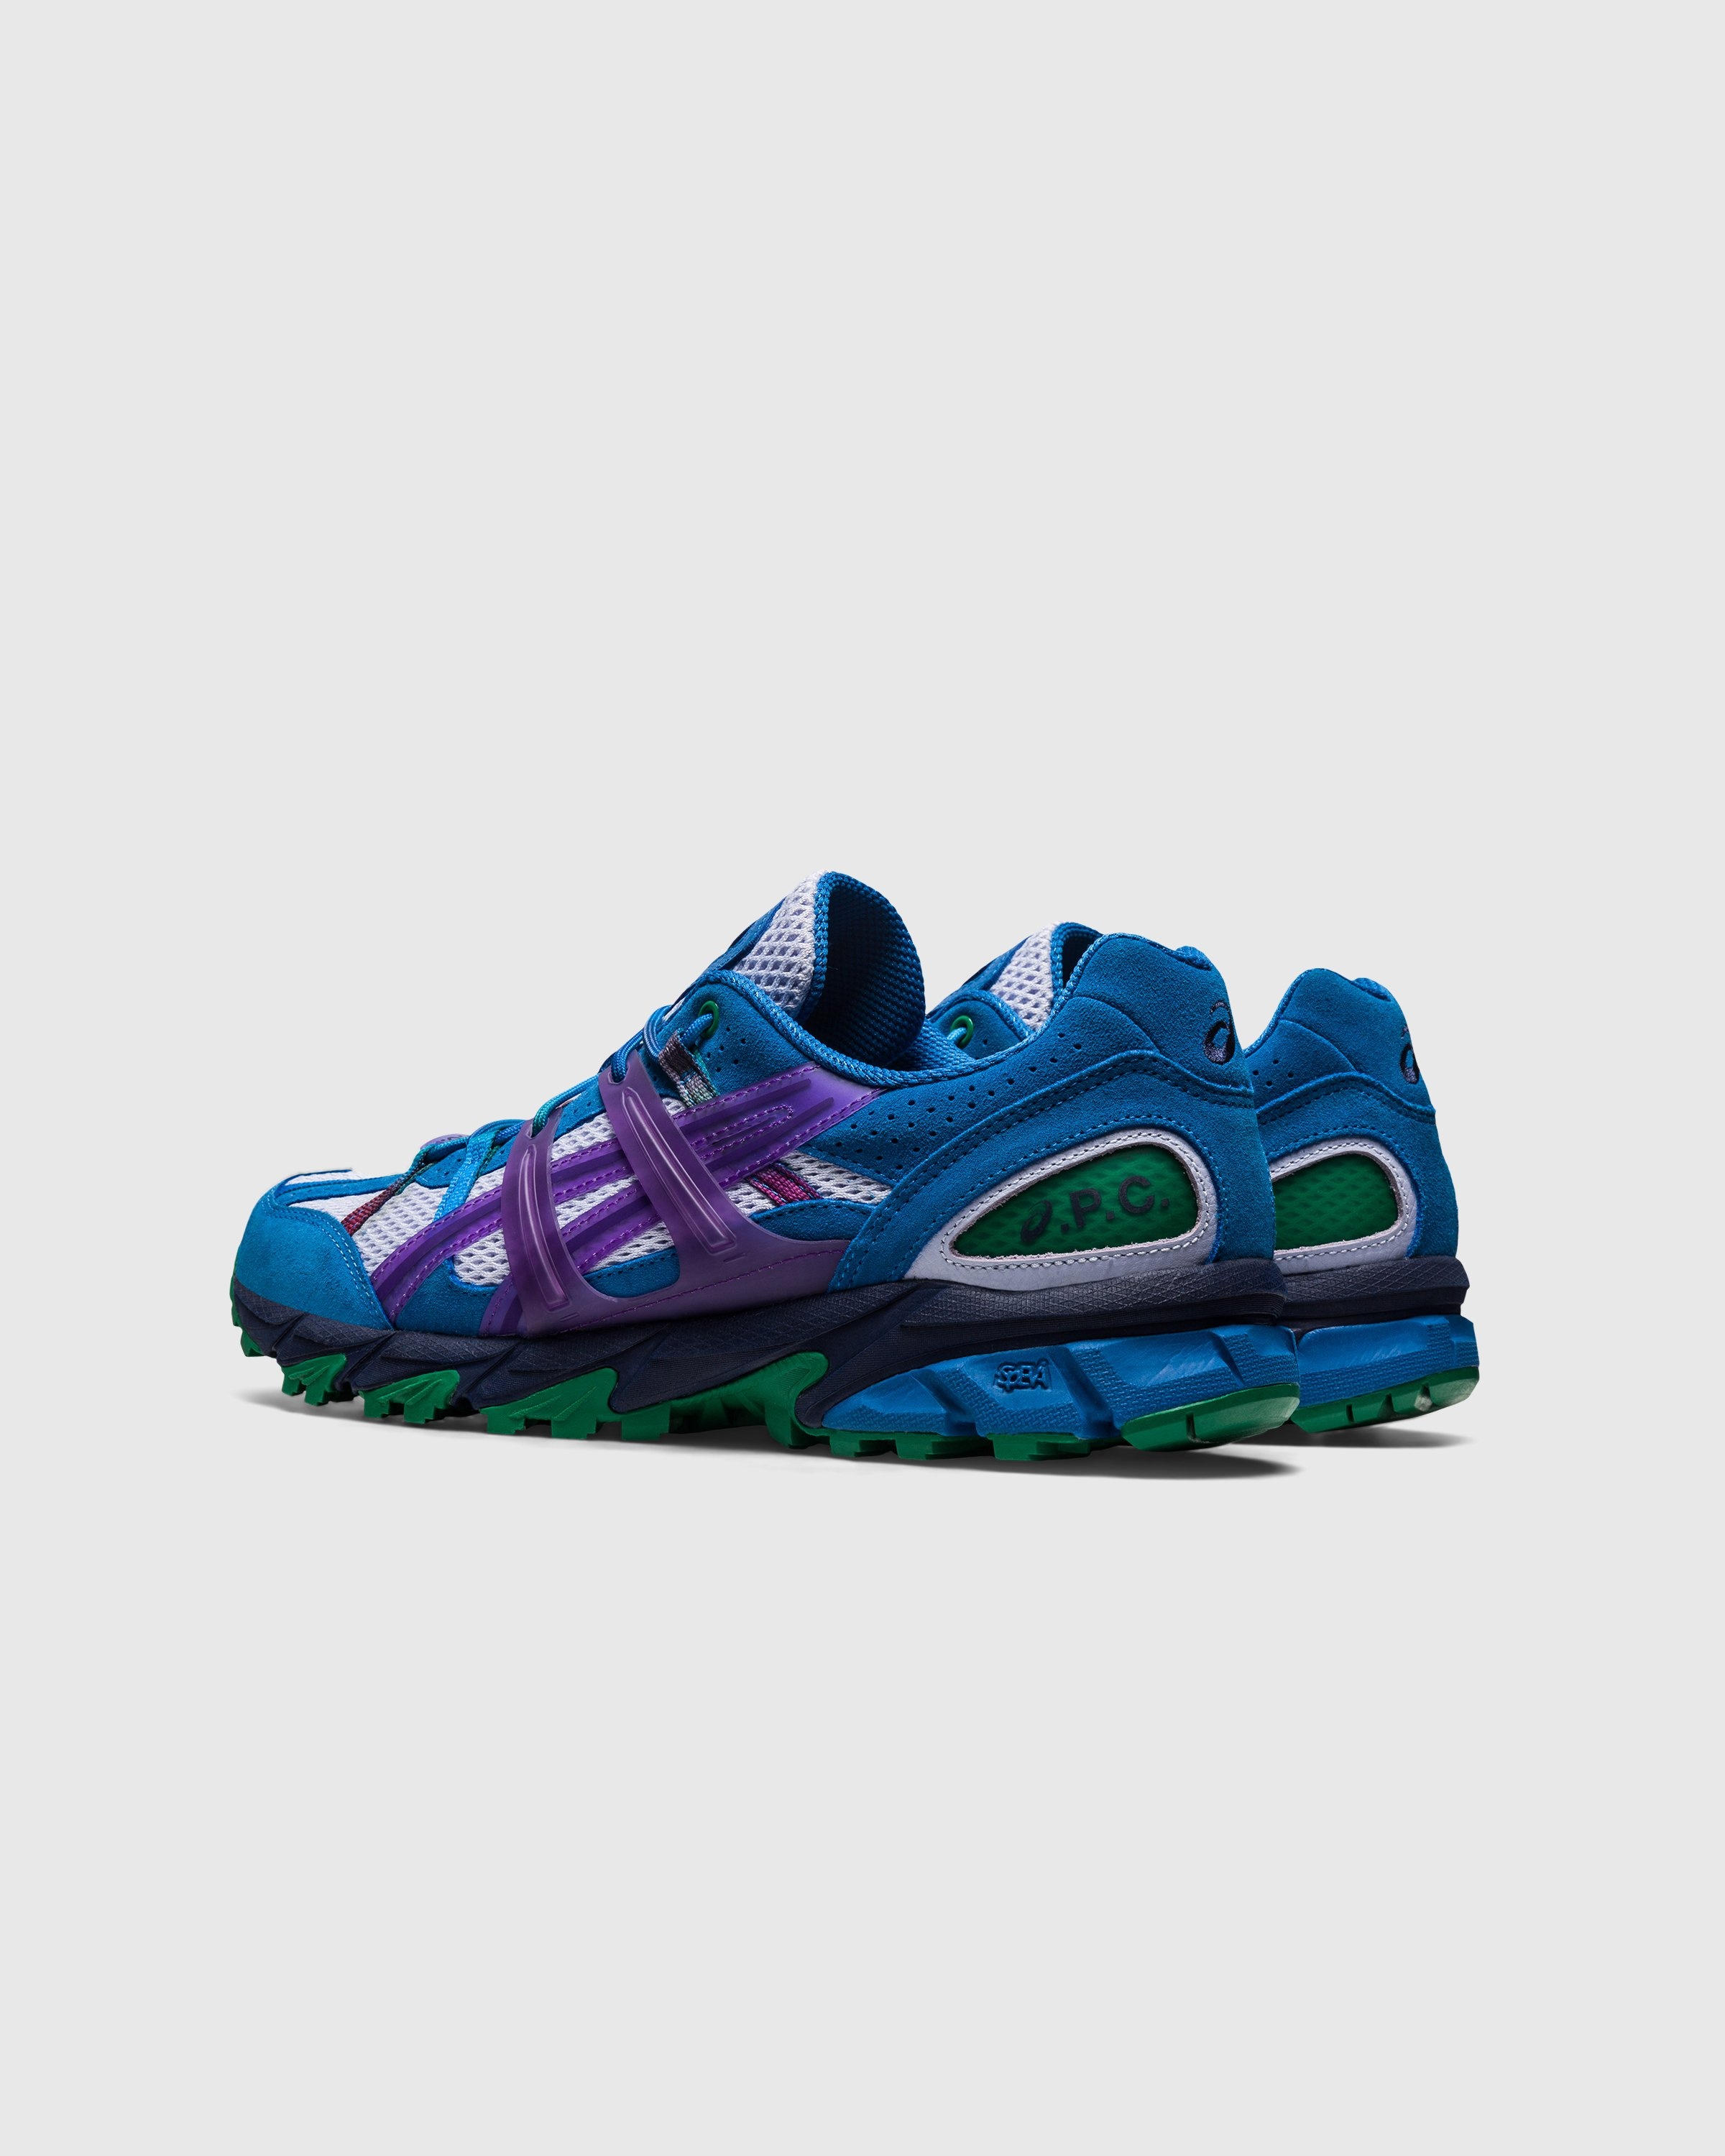 asics x A.P.C. – GEL-SONOMA 15-50 Lilac Opal/Gentry Purple - Low Top Sneakers - Purple - Image 4